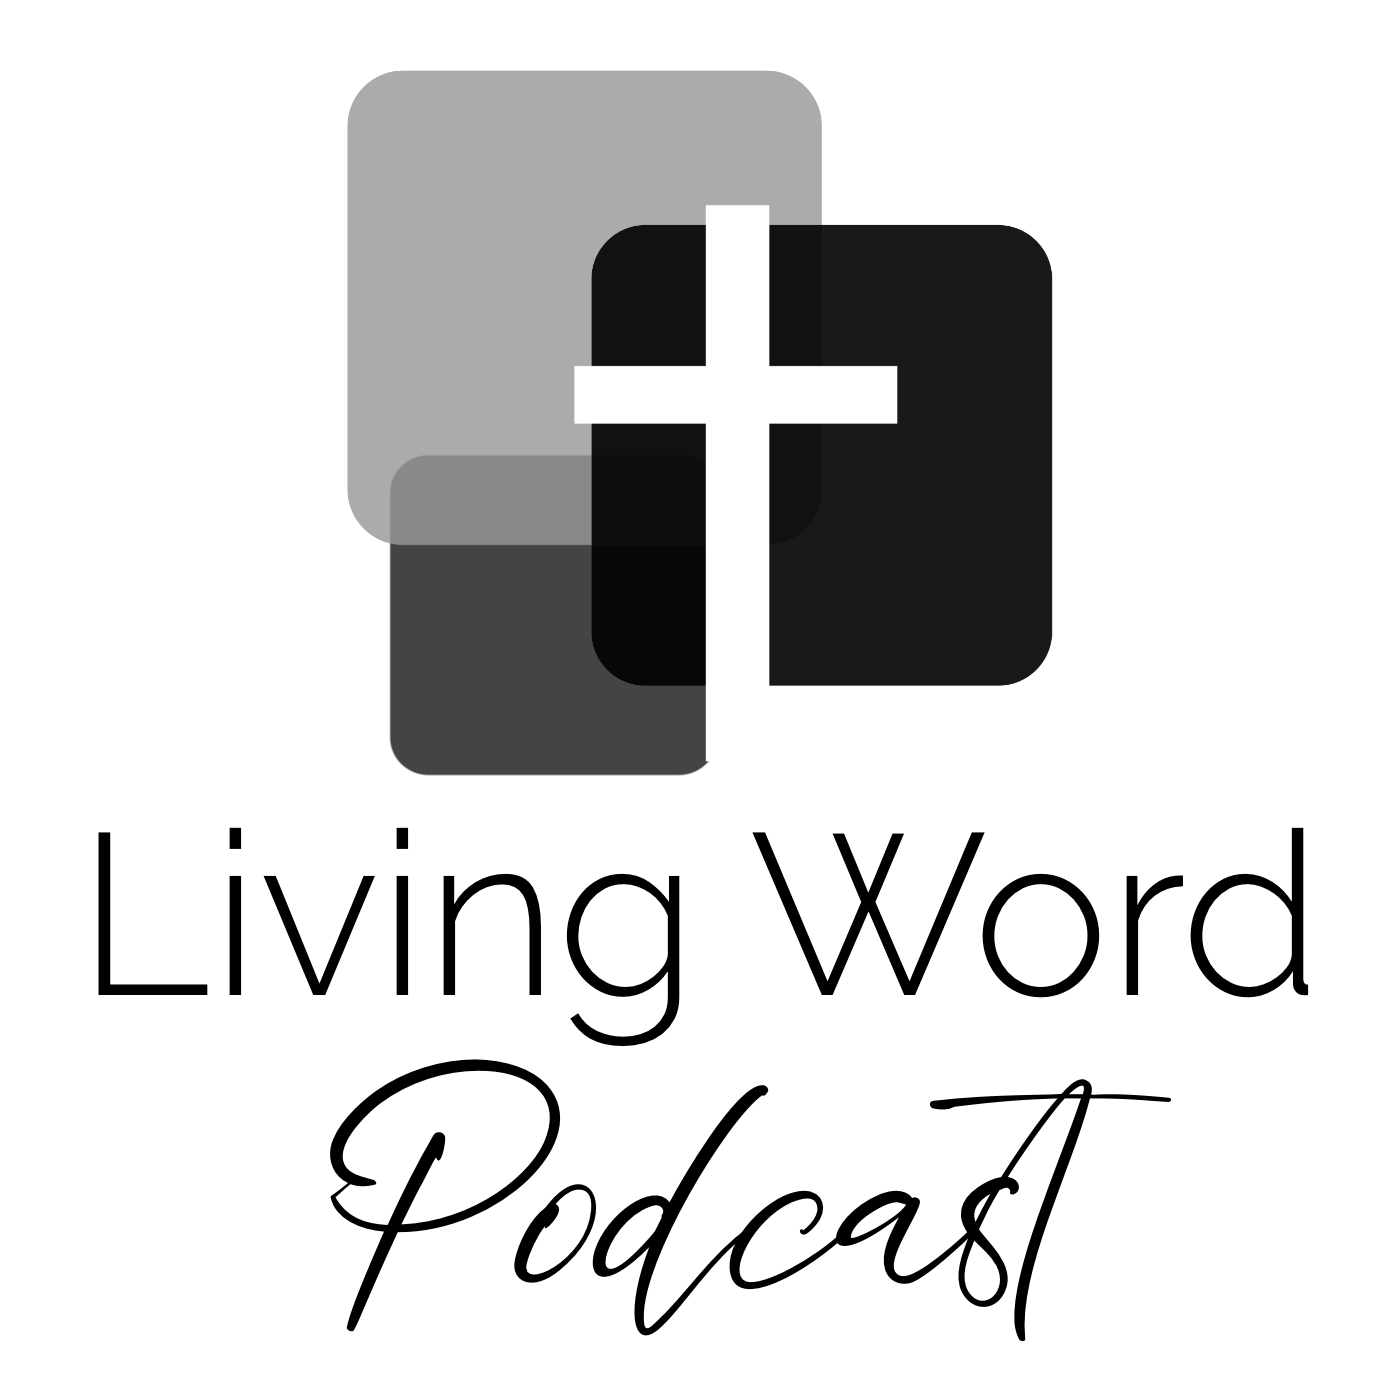 Living Word Church Podcast